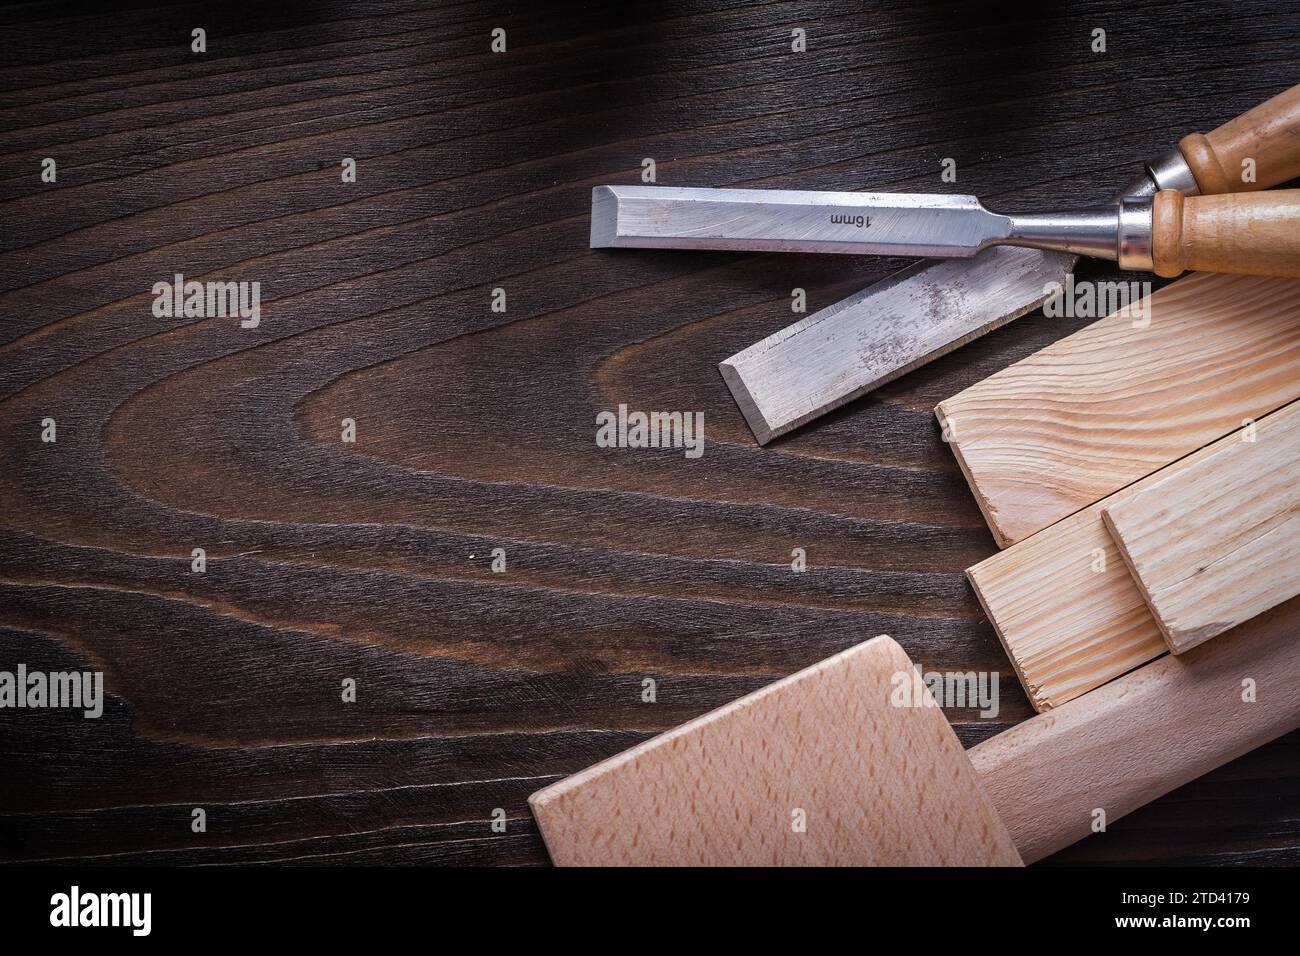 Lump hammer flat chisels and wooden bricks on brown vintage wooden board copy room picture building concept Stock Photo